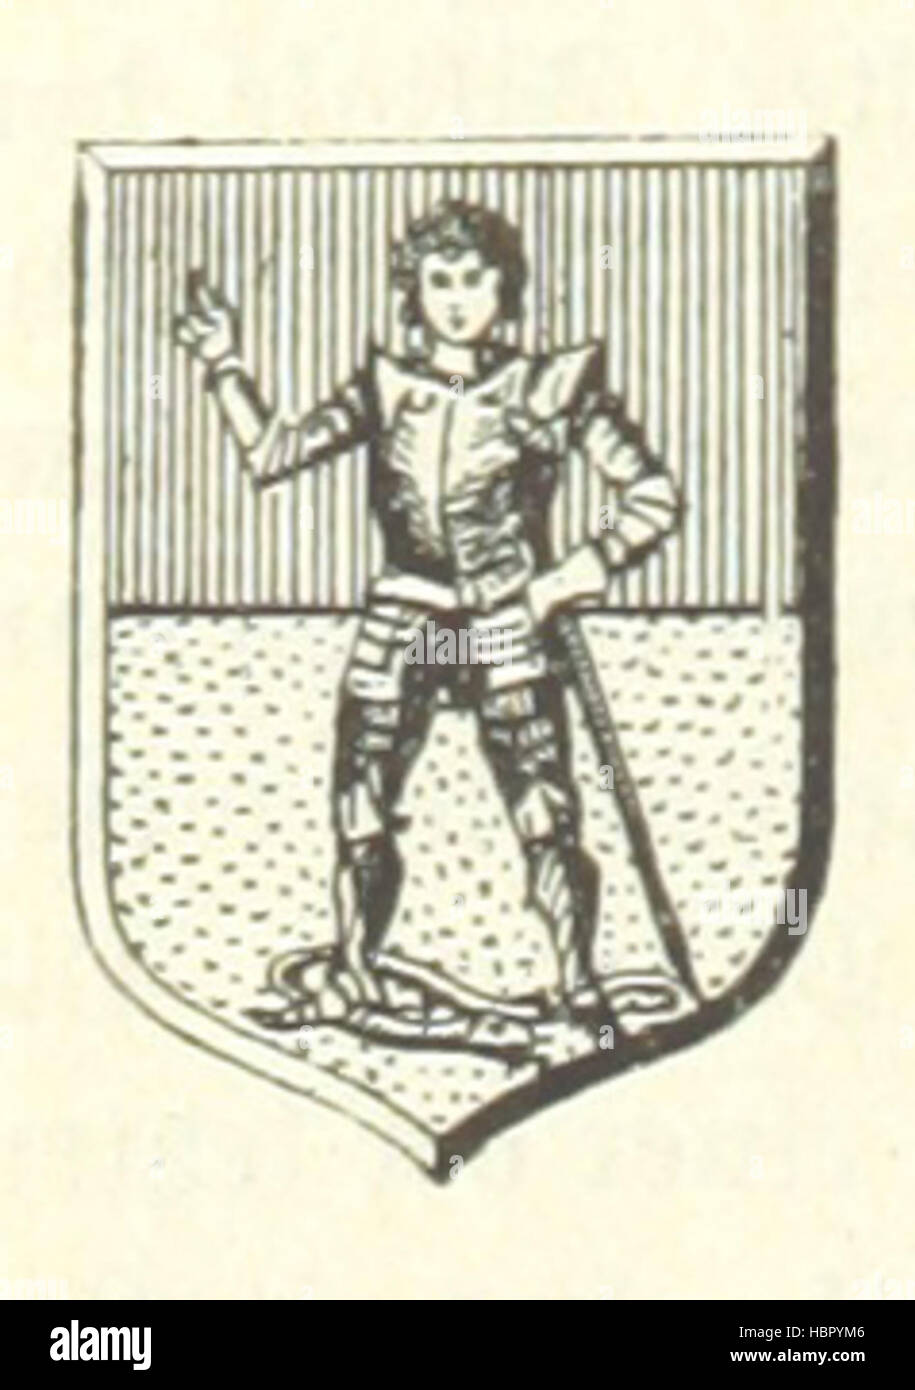 Image taken from page 1106 of 'Geographisch-historisches Handbuch von Bayern' Image taken from page 1106 of 'Geographisch-historisches Handbuch von Bayern' Stock Photo